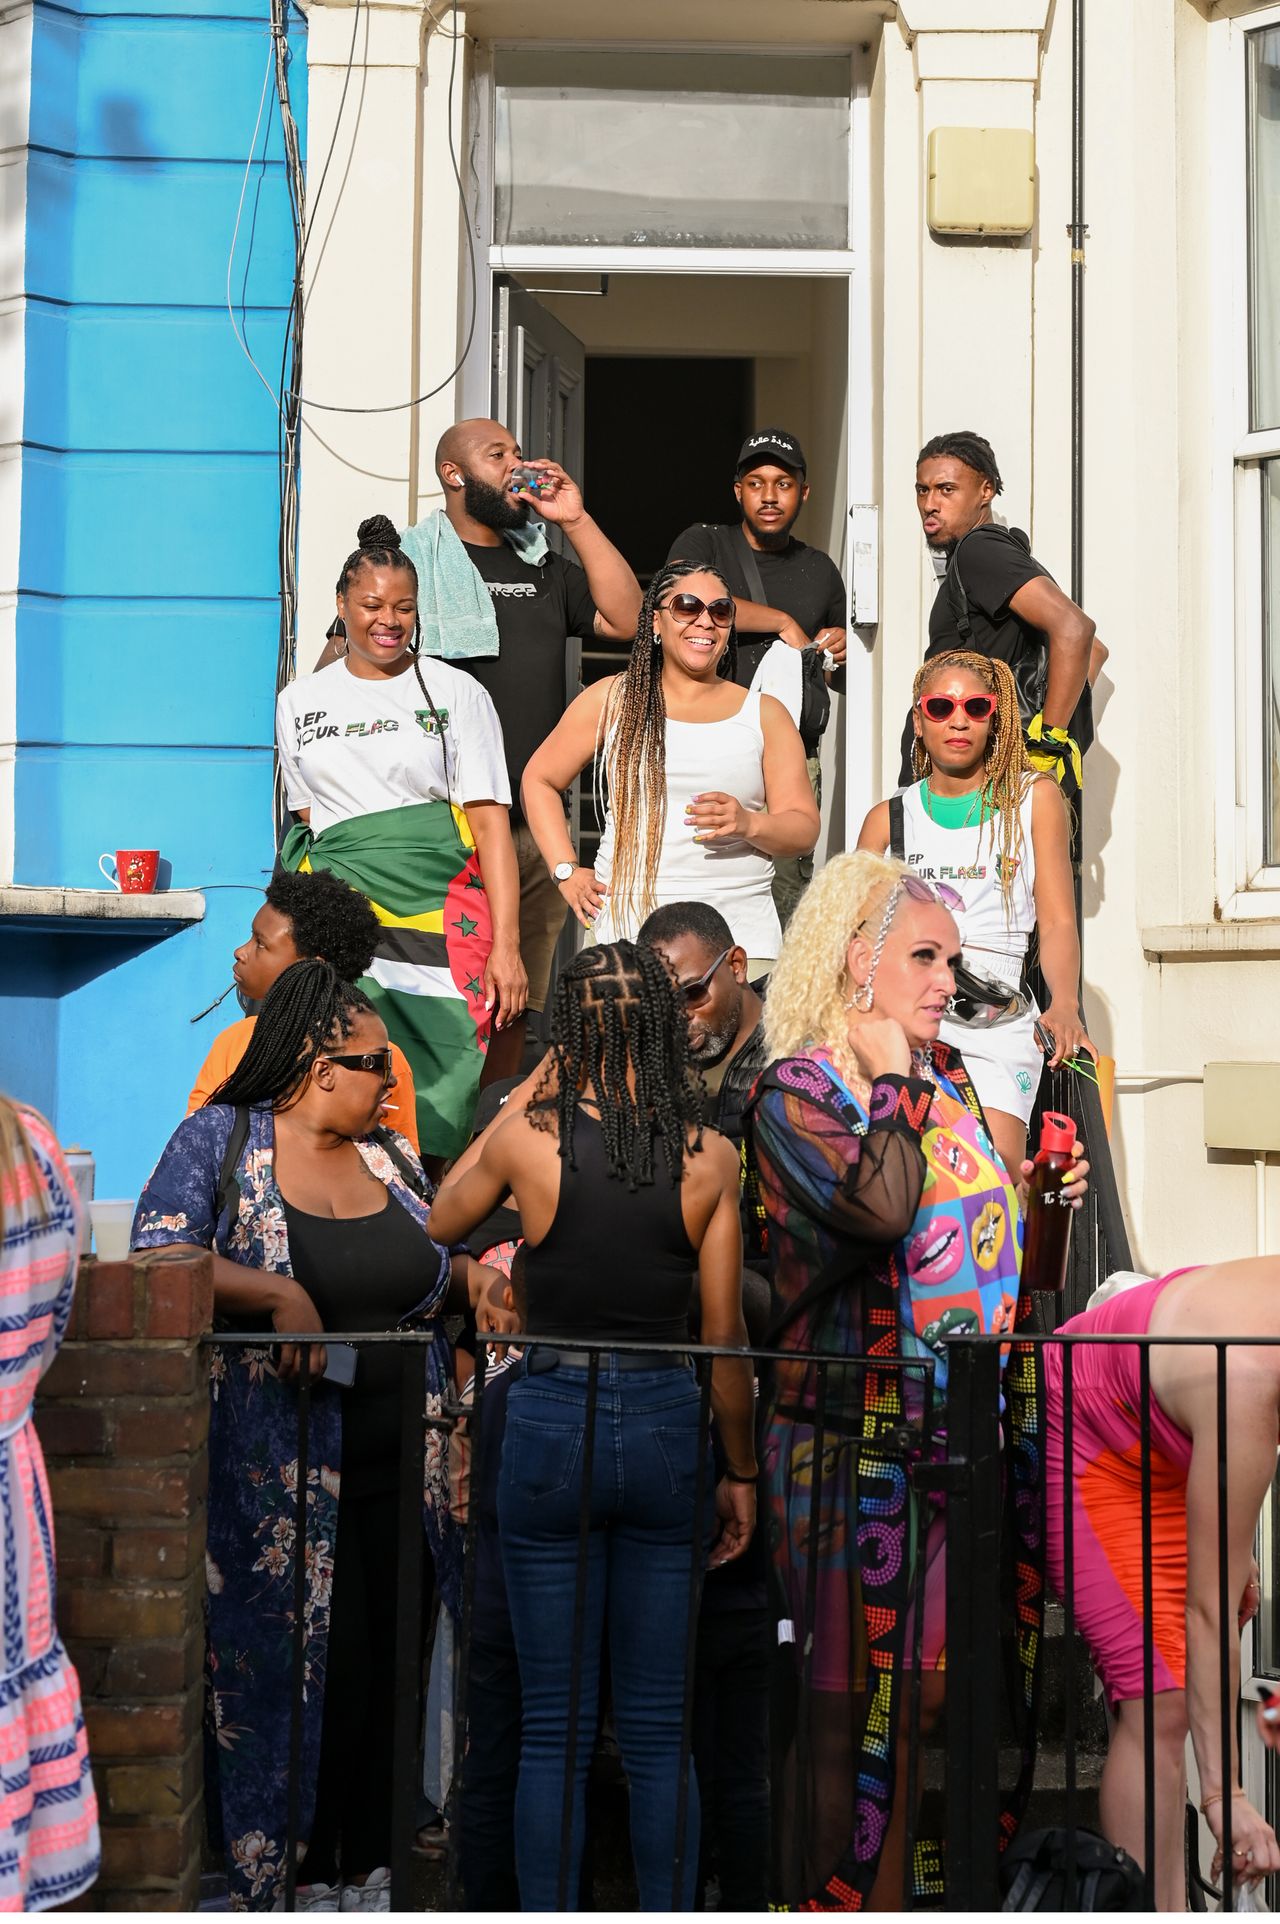 Onlookers watch the Notting Hill Carnival parade go down Ladbroke Grove.